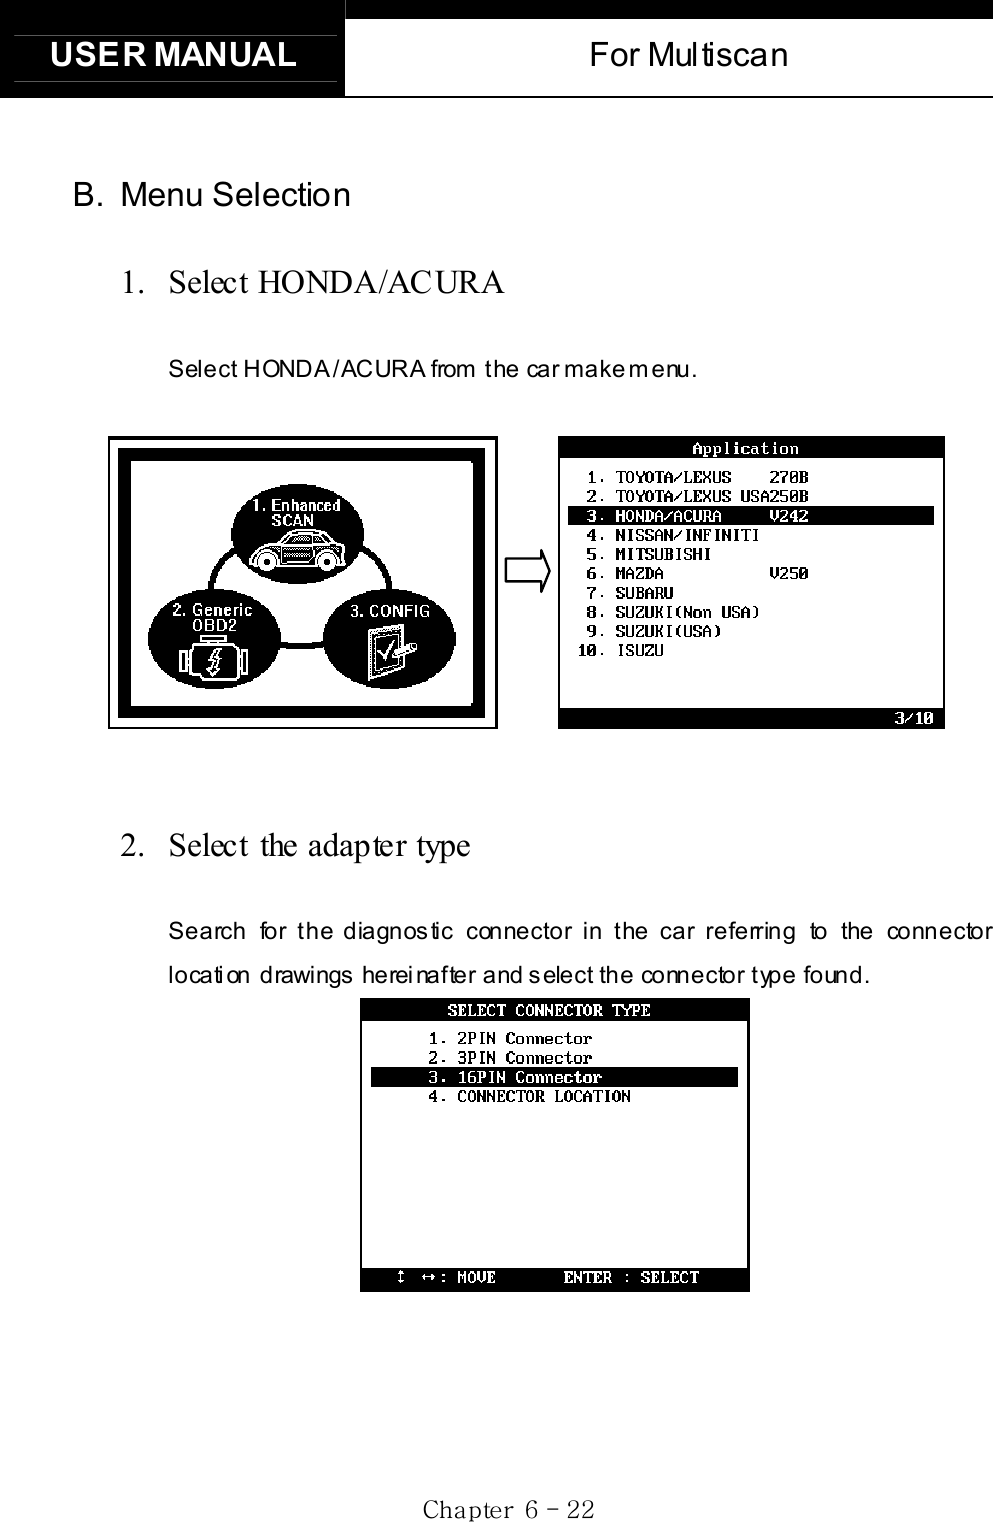 USER MANUAL  For Multiscan Gj G]G TGYYGB. Menu Selection1. Select HONDA/AC URA Select HONDA /ACURA  from  the  car make menu.            2.  Select the adapter type Search for the diagnostic connector in the car referring to the connector location drawings hereinafter and select the connector type found. 